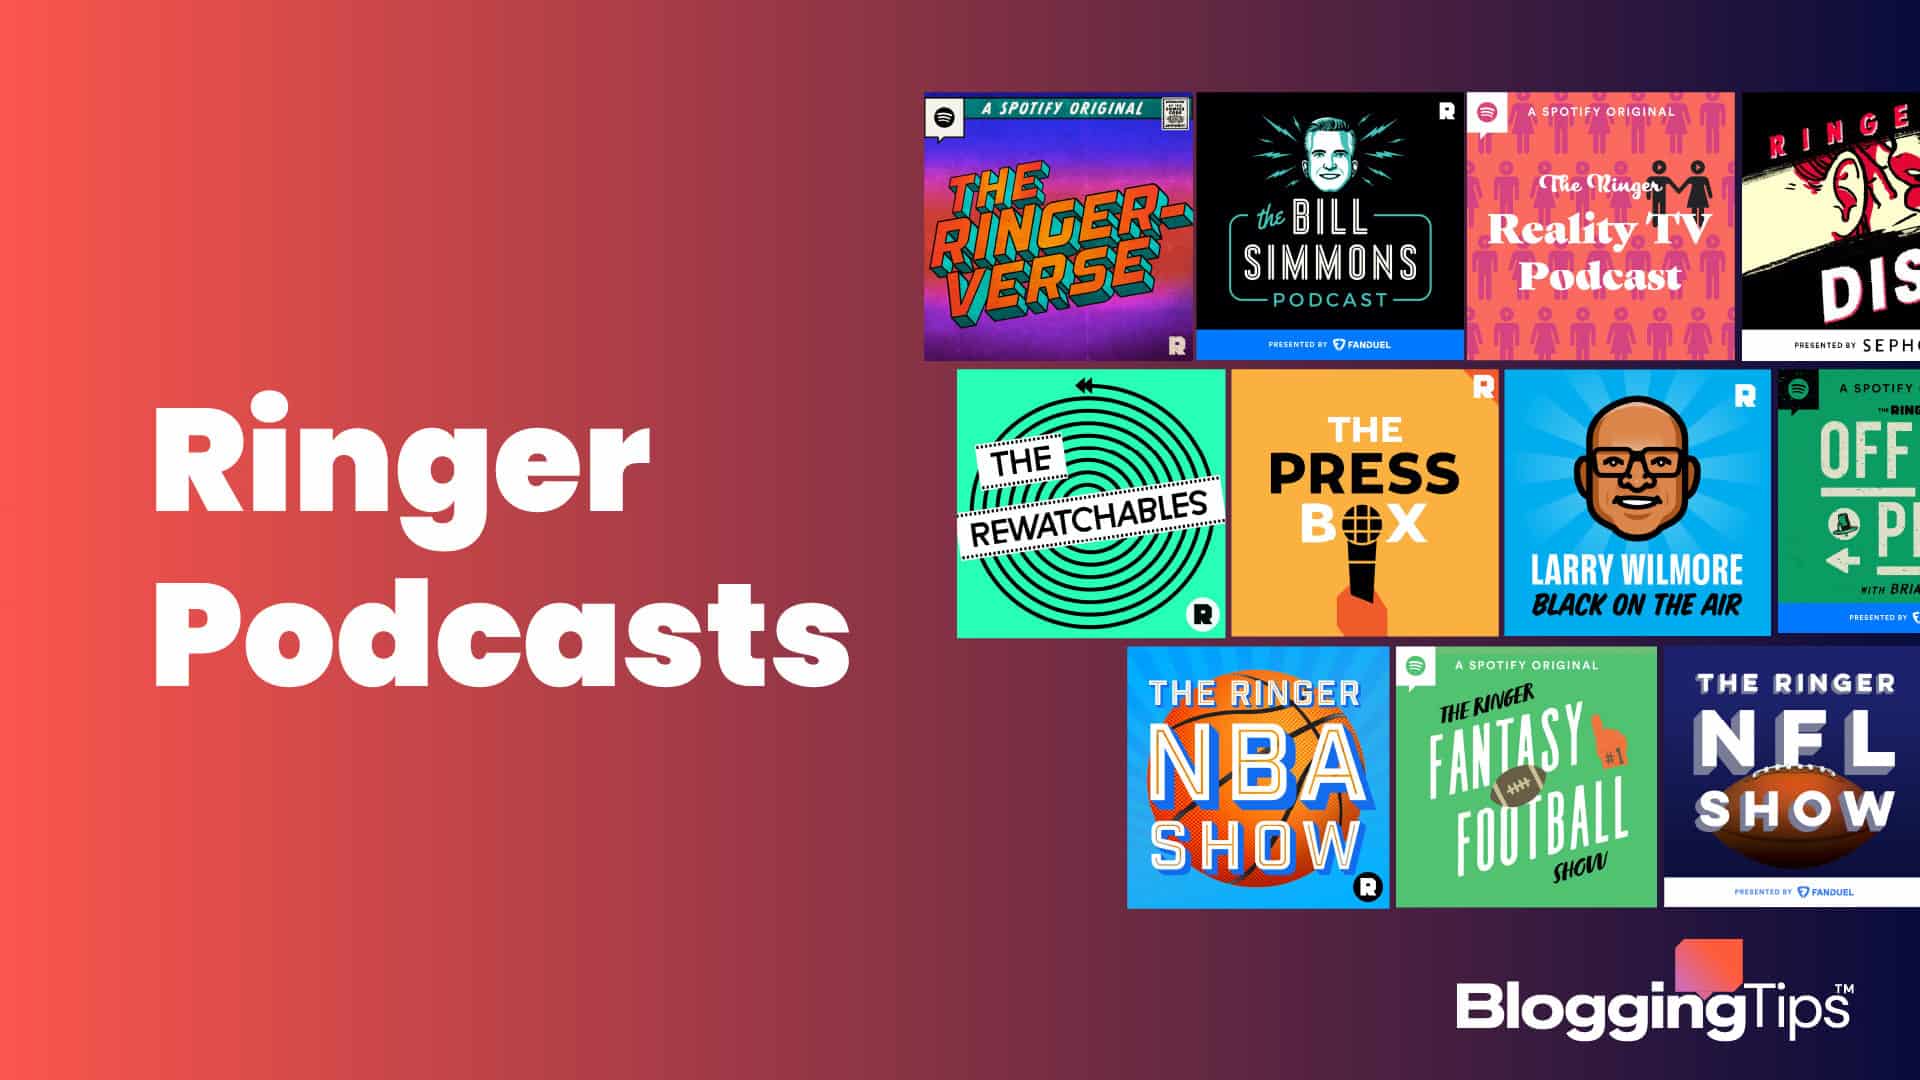 vector graphic showing an illustration of the best Ringer Podcasts logos with the big block text 